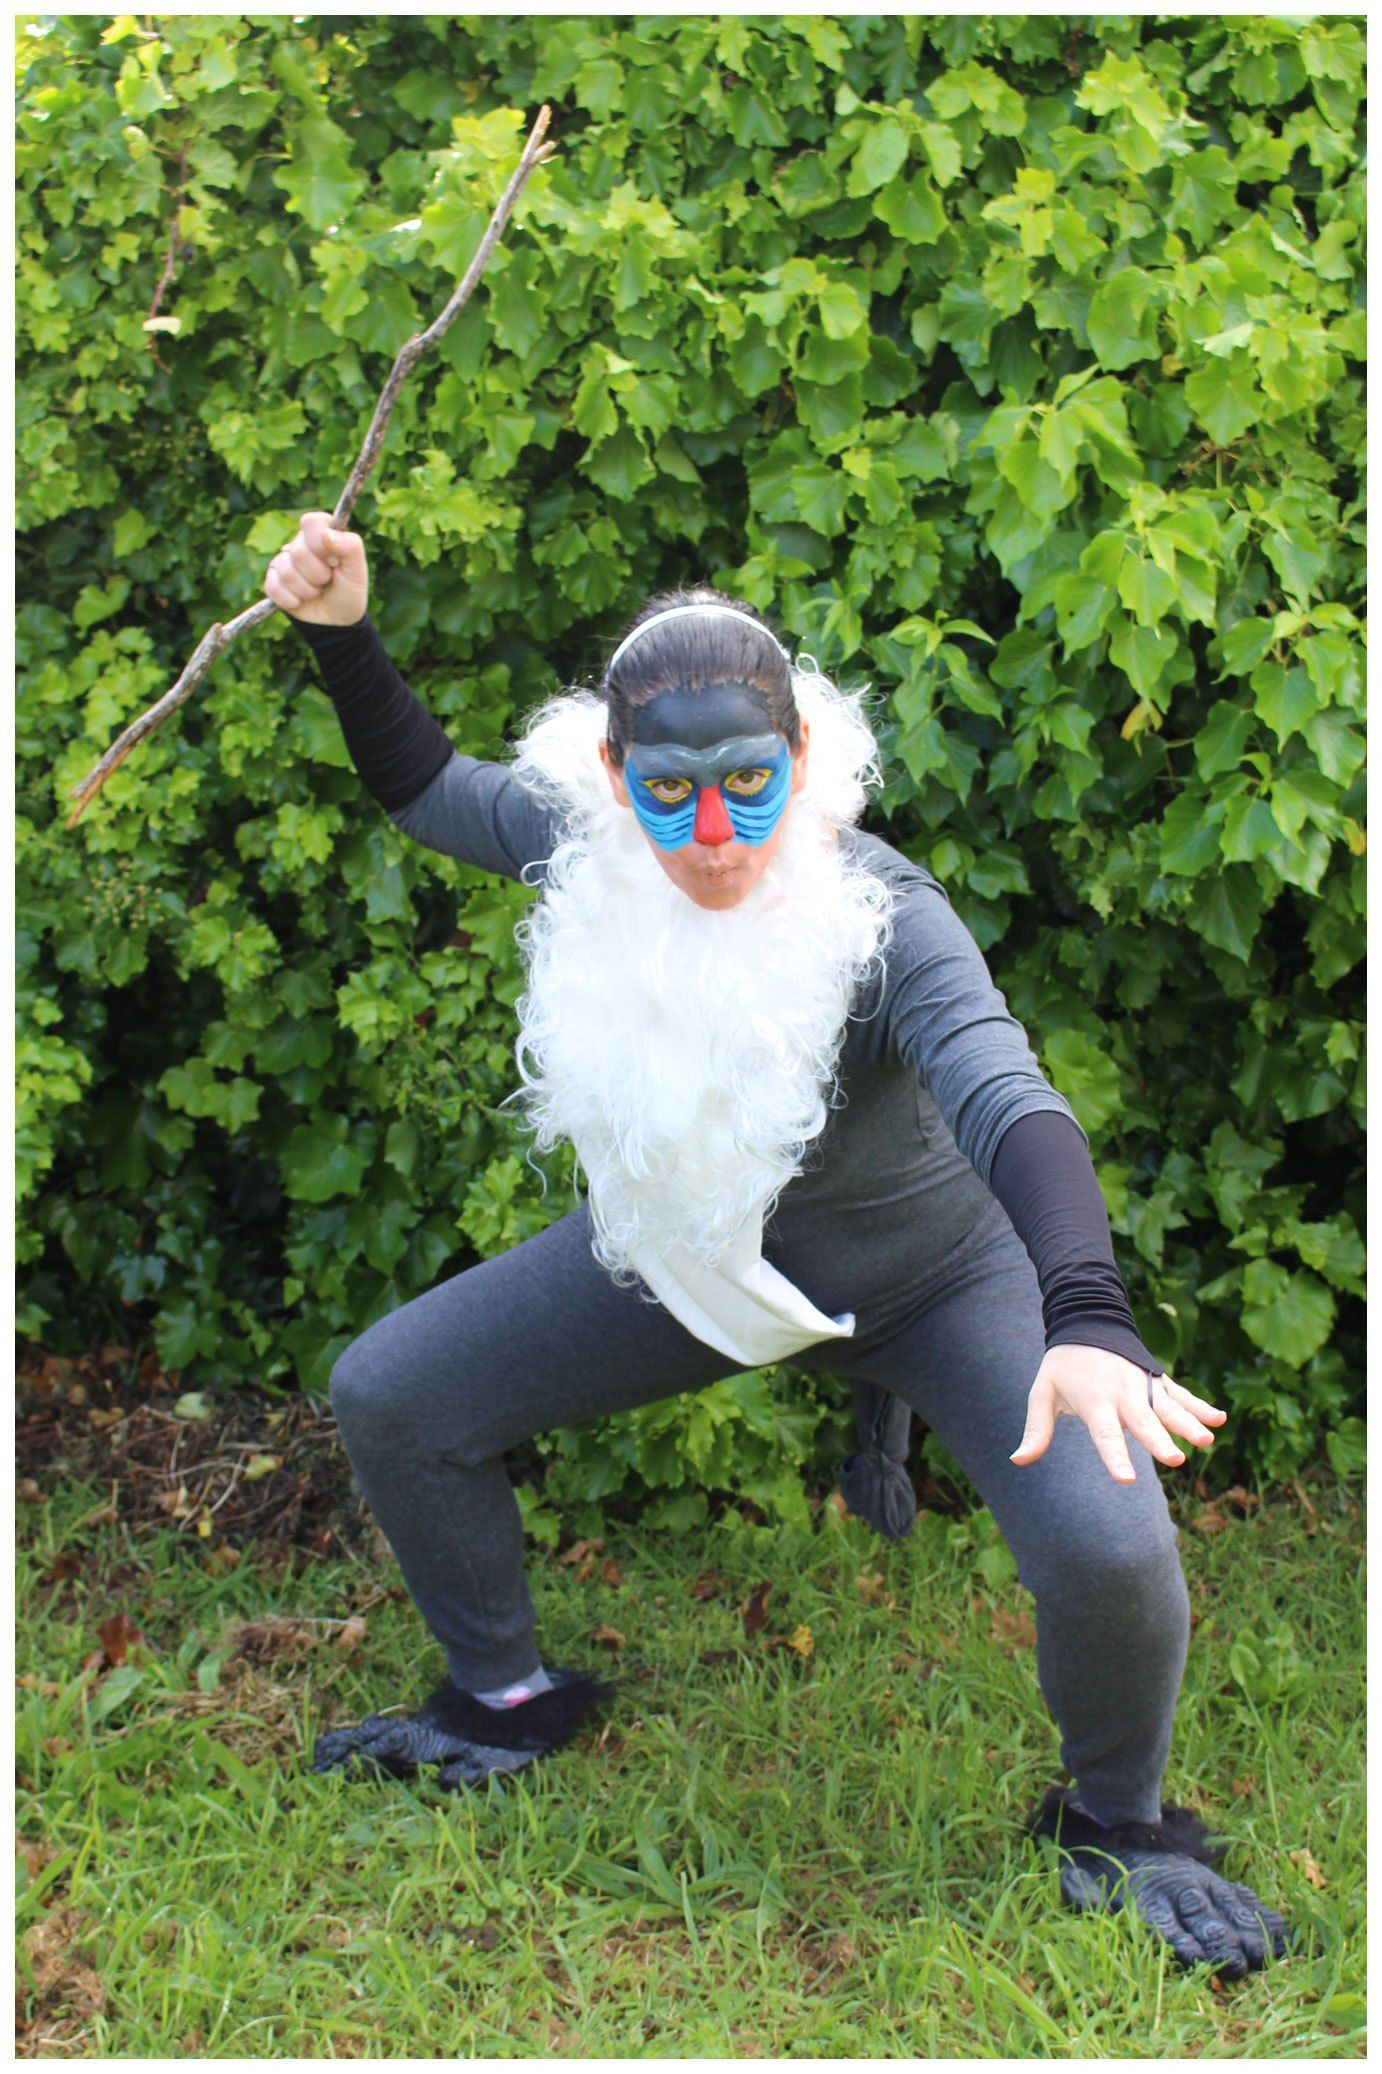 Lion King Costumes DIY
 Rafiki from The Lion King Costume Get more costume and